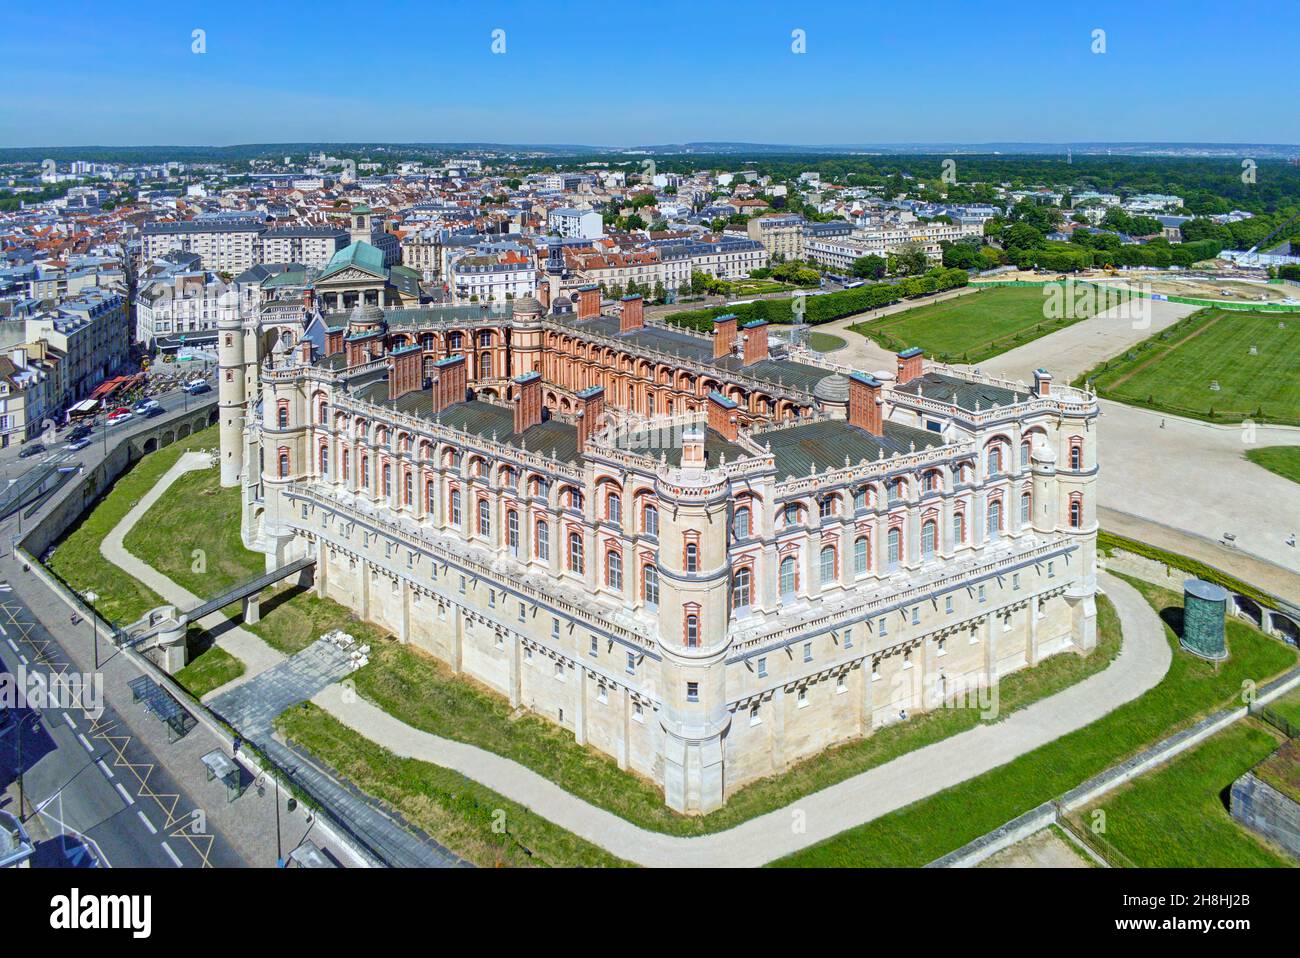 France, Yvelines, Saint-Germain-en-Laye, the castle, place of the National Archeological museum Stock Photo